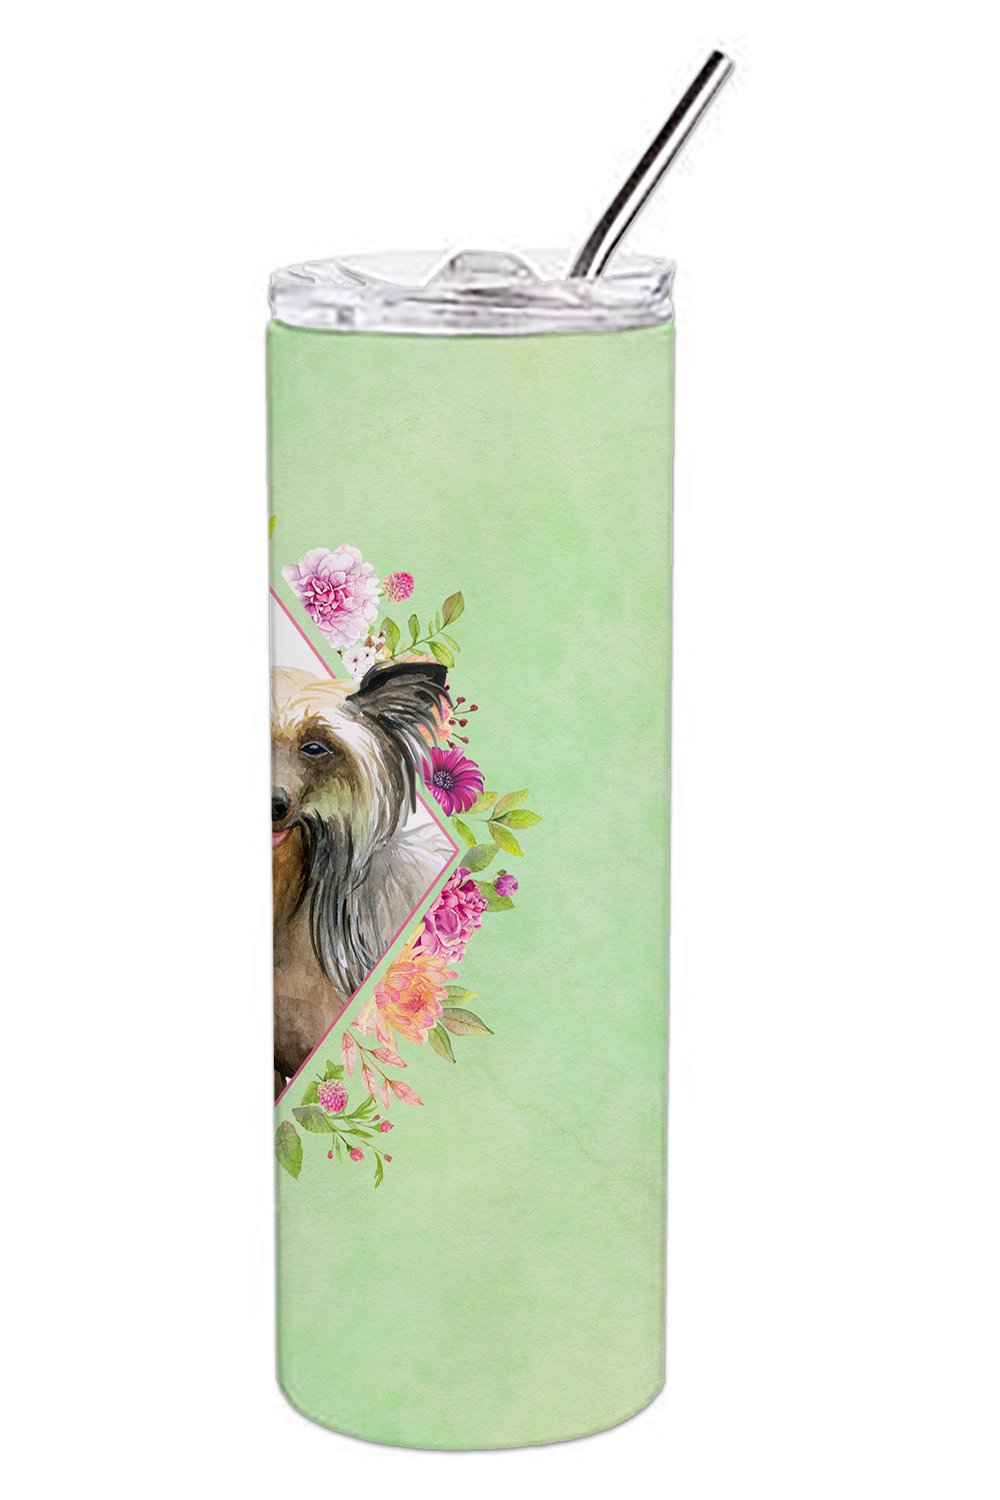 Chinese Crested Green Flowers Double Walled Stainless Steel 20 oz Skinny Tumbler CK4290TBL20 by Caroline's Treasures